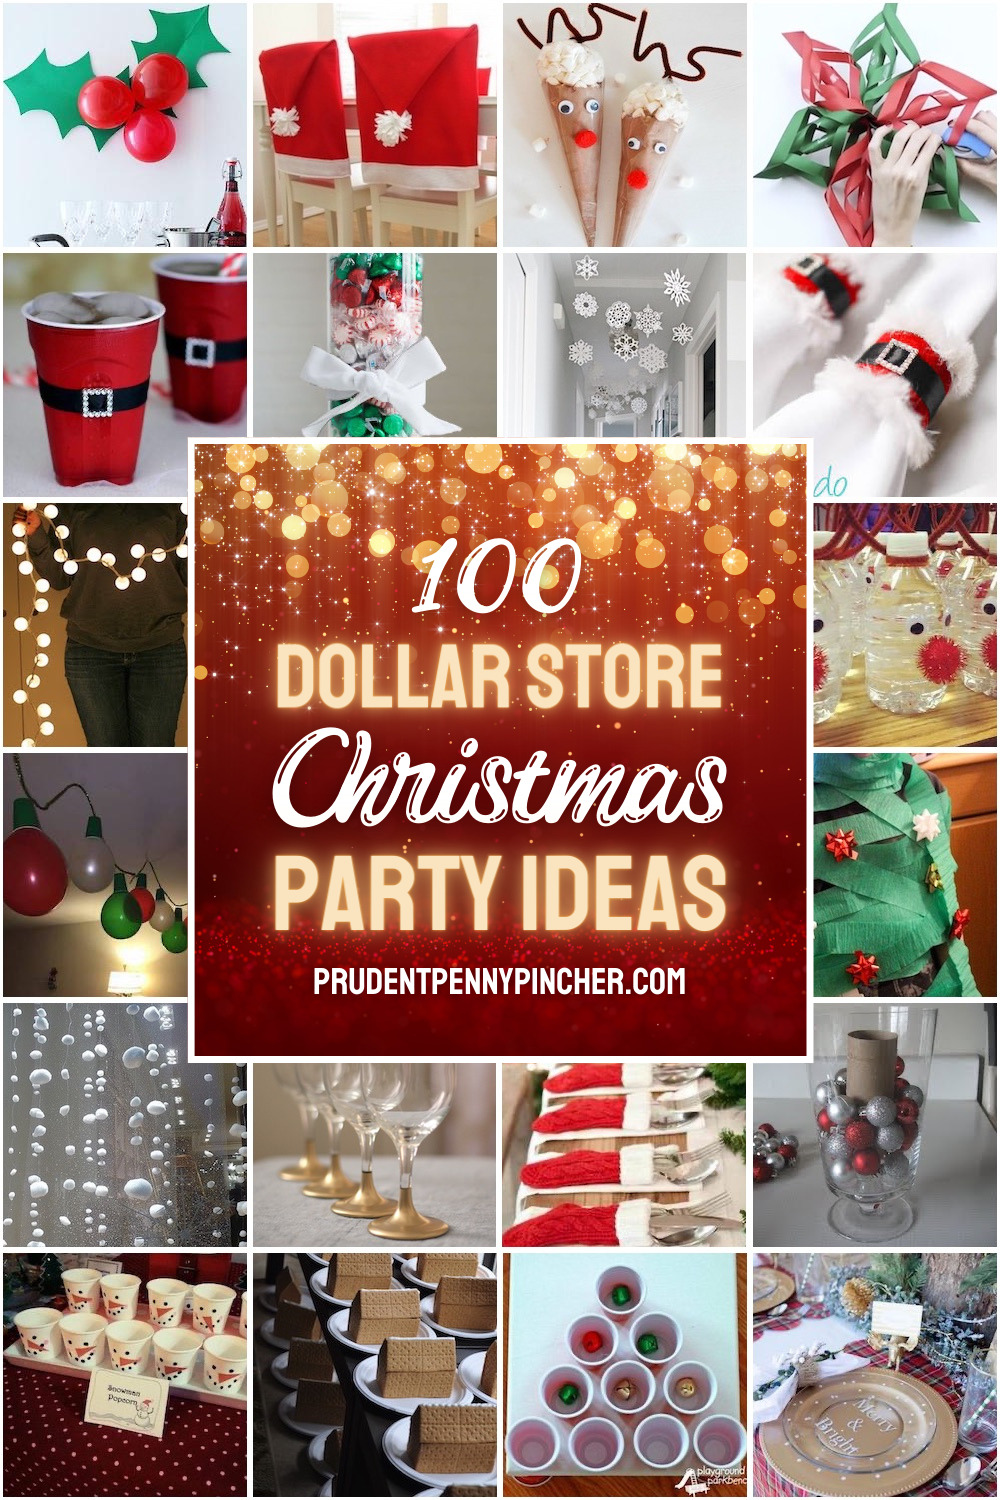 100 Dollar Store Christmas Party Ideas Prudent Penny Pincher